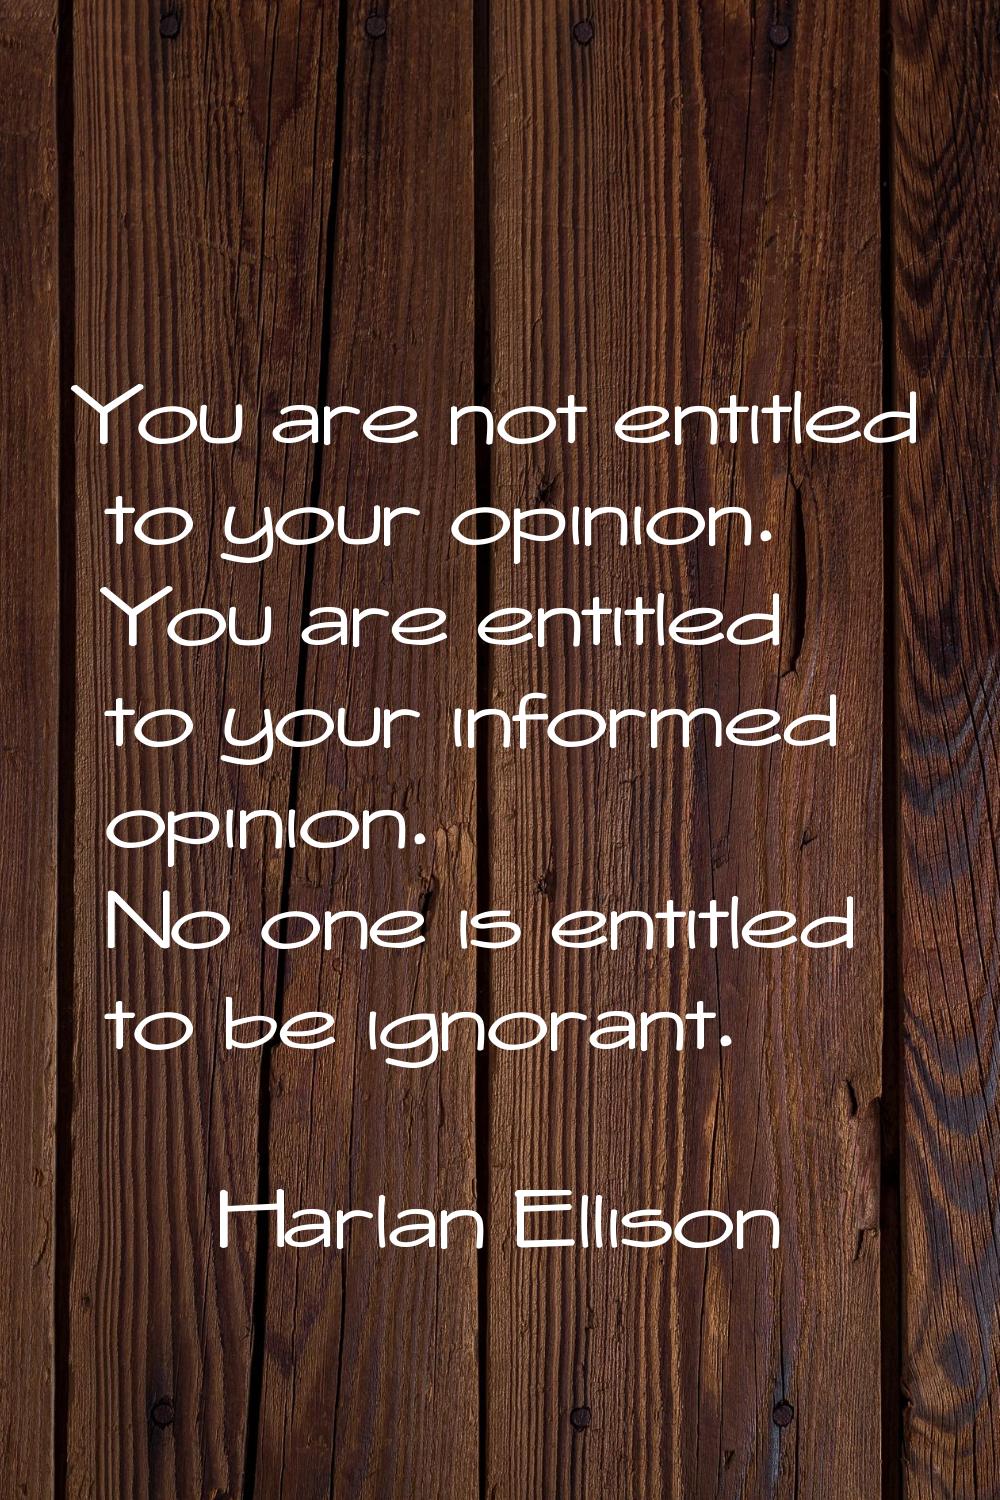 You are not entitled to your opinion. You are entitled to your informed opinion. No one is entitled